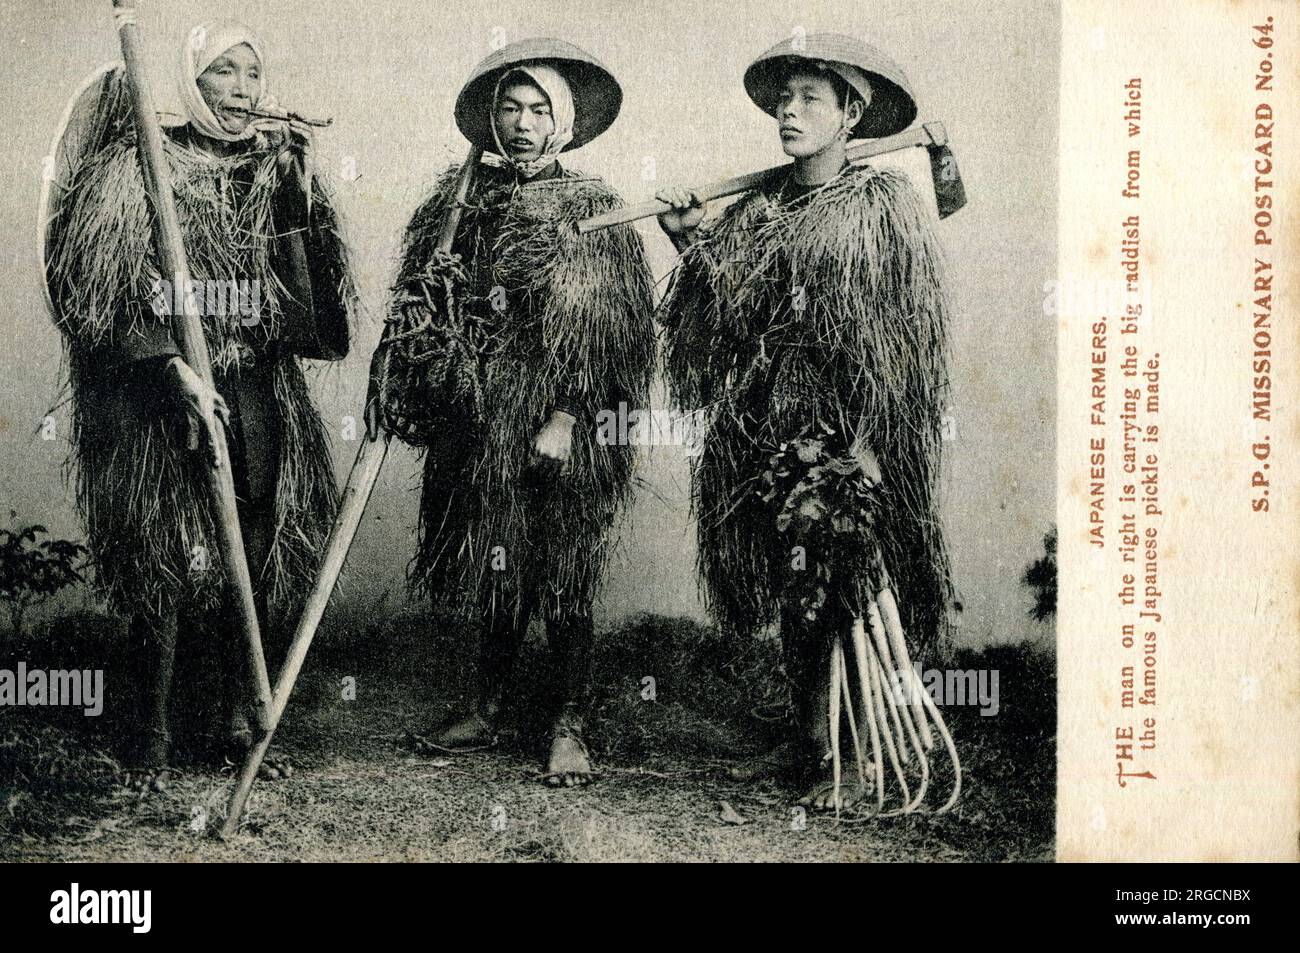 Three Japanese farmers - the man on the right is holding the large radish from which the famous Japanese pickle is made - Society for the Propagation of the Gospel in Foreign Parts Stock Photo